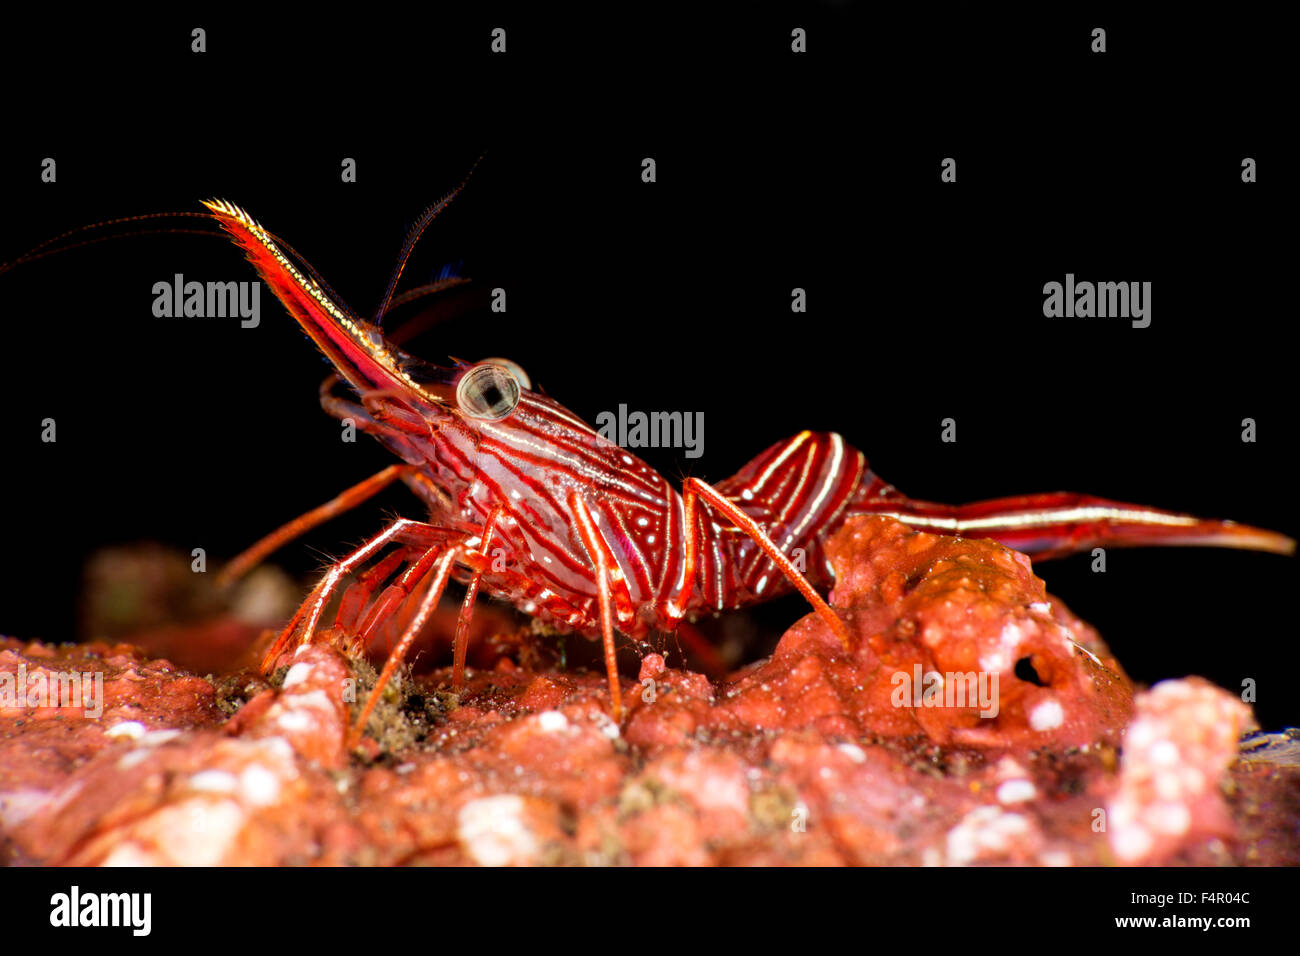 Red Durban Dancing Shrimp Isolated on Black Background Stock Photo